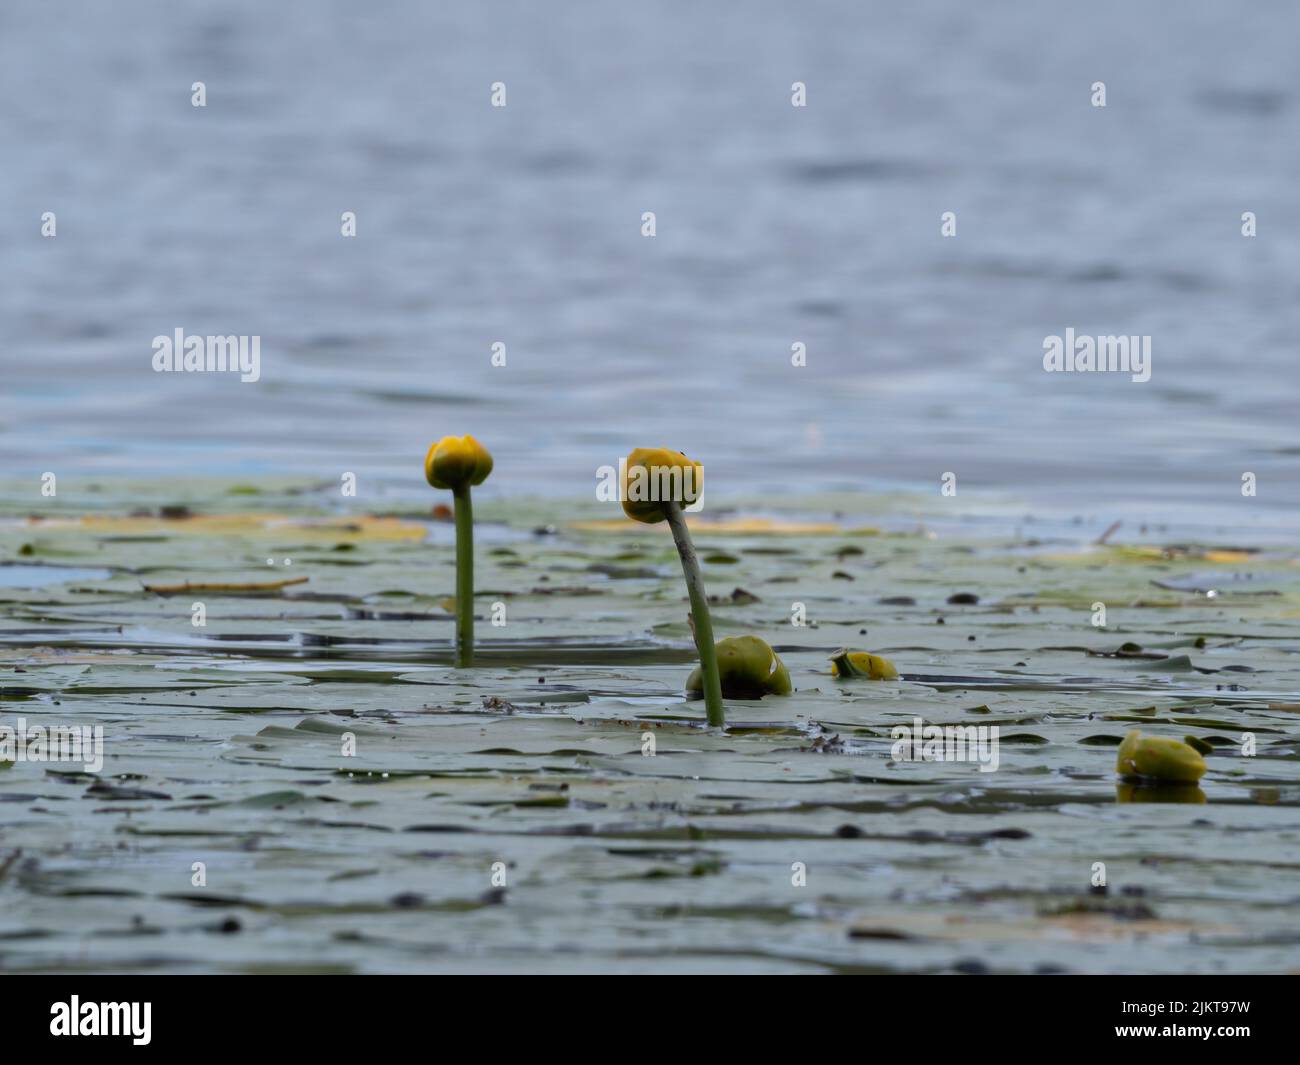 A close-up shot of some yellow water-lilies growing in the water. Stock Photo